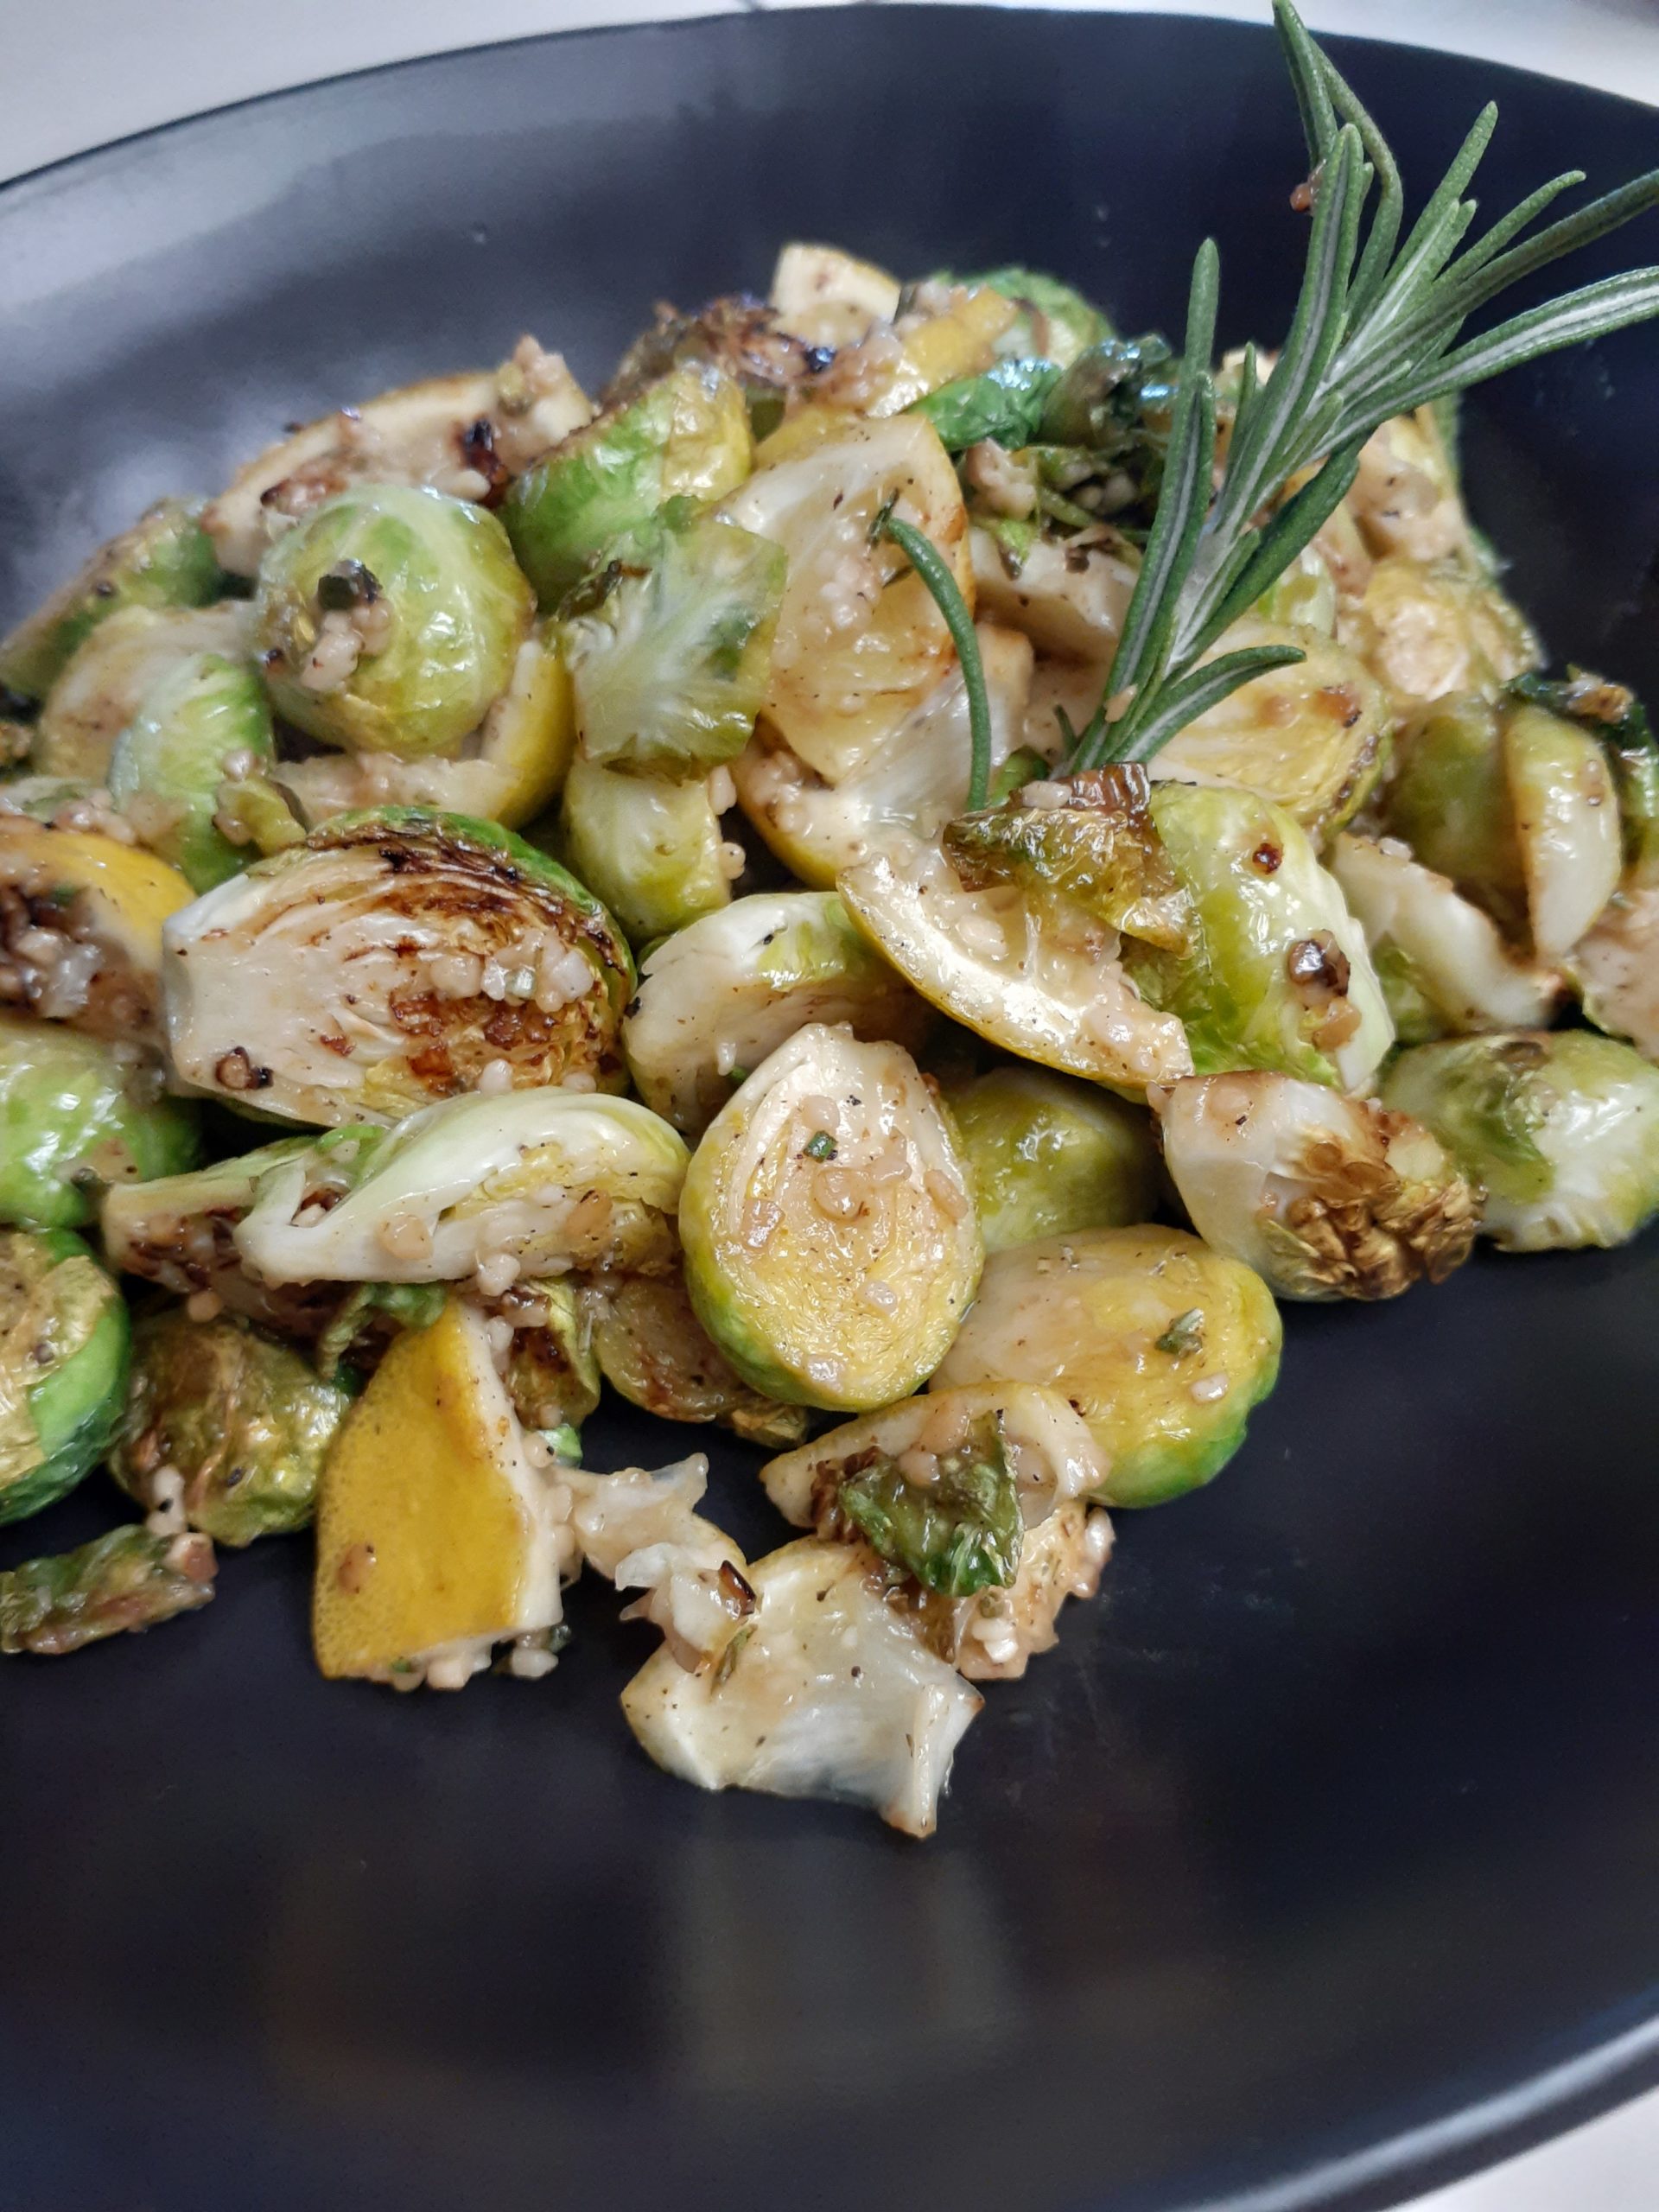 Garlicky-Lemon-Rosemary Brussel Sprouts by Stacey Amagrande